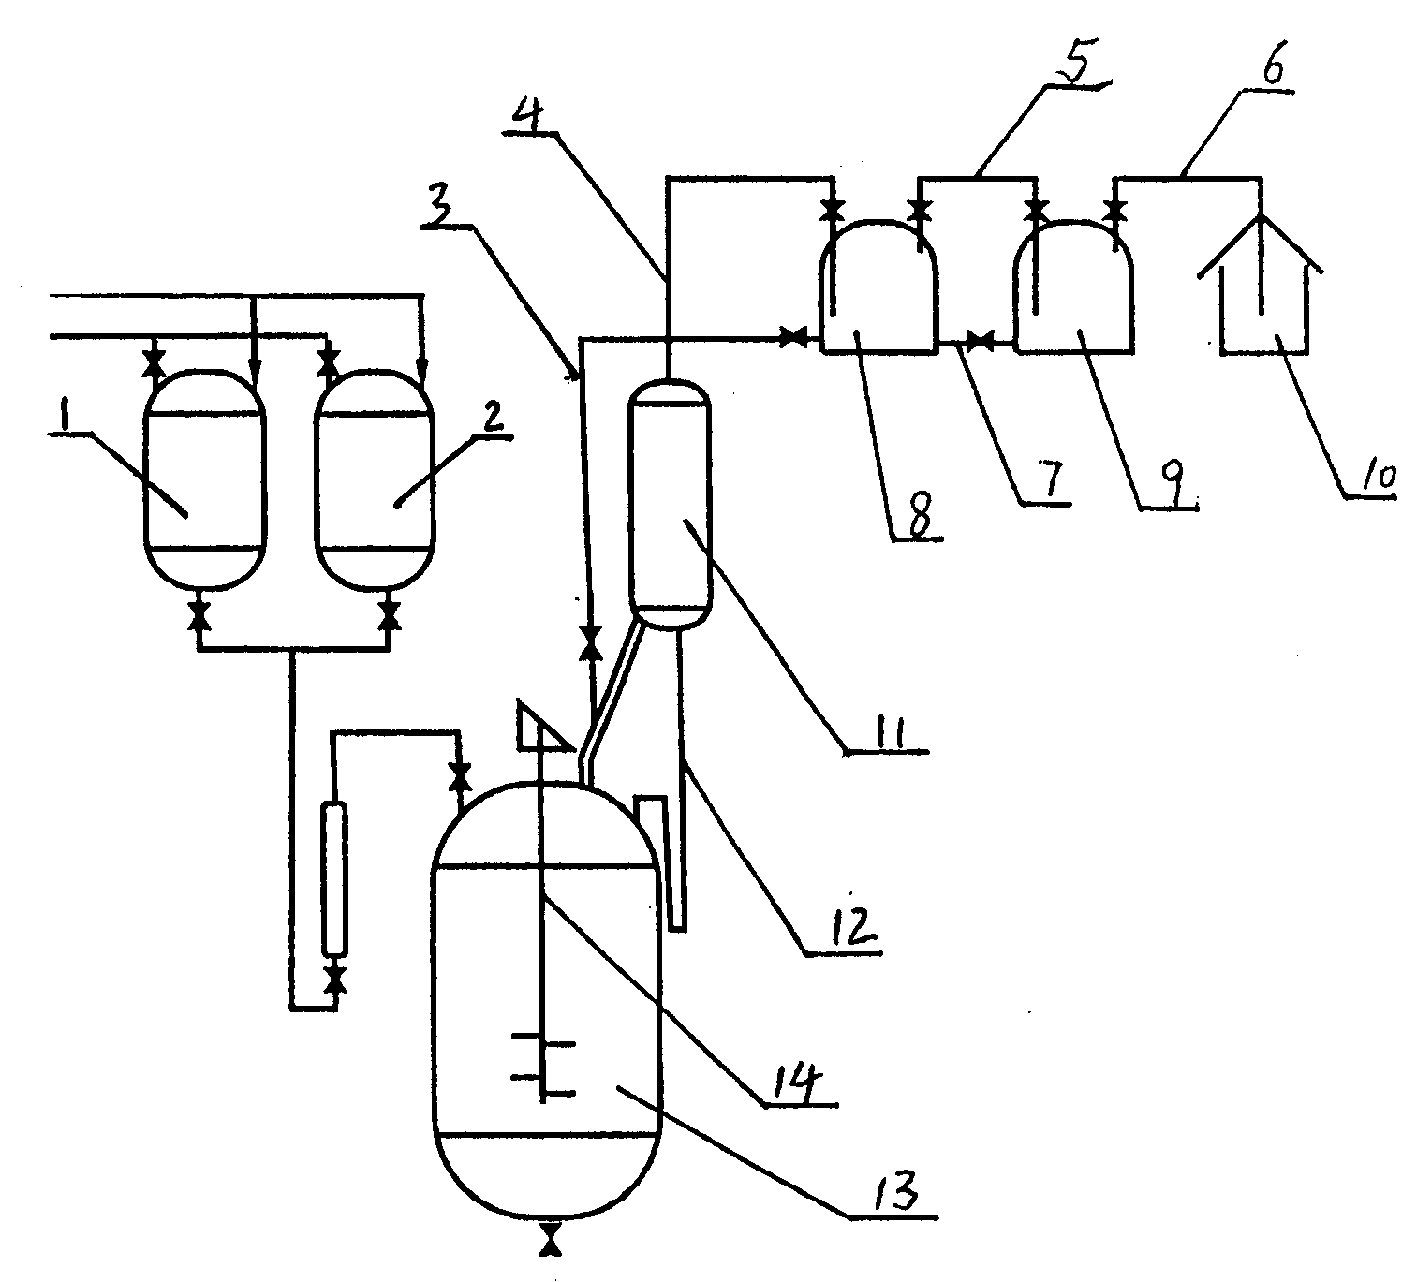 Preparation process and apparatus for alpha-acetyl-gamma-butyrolactone